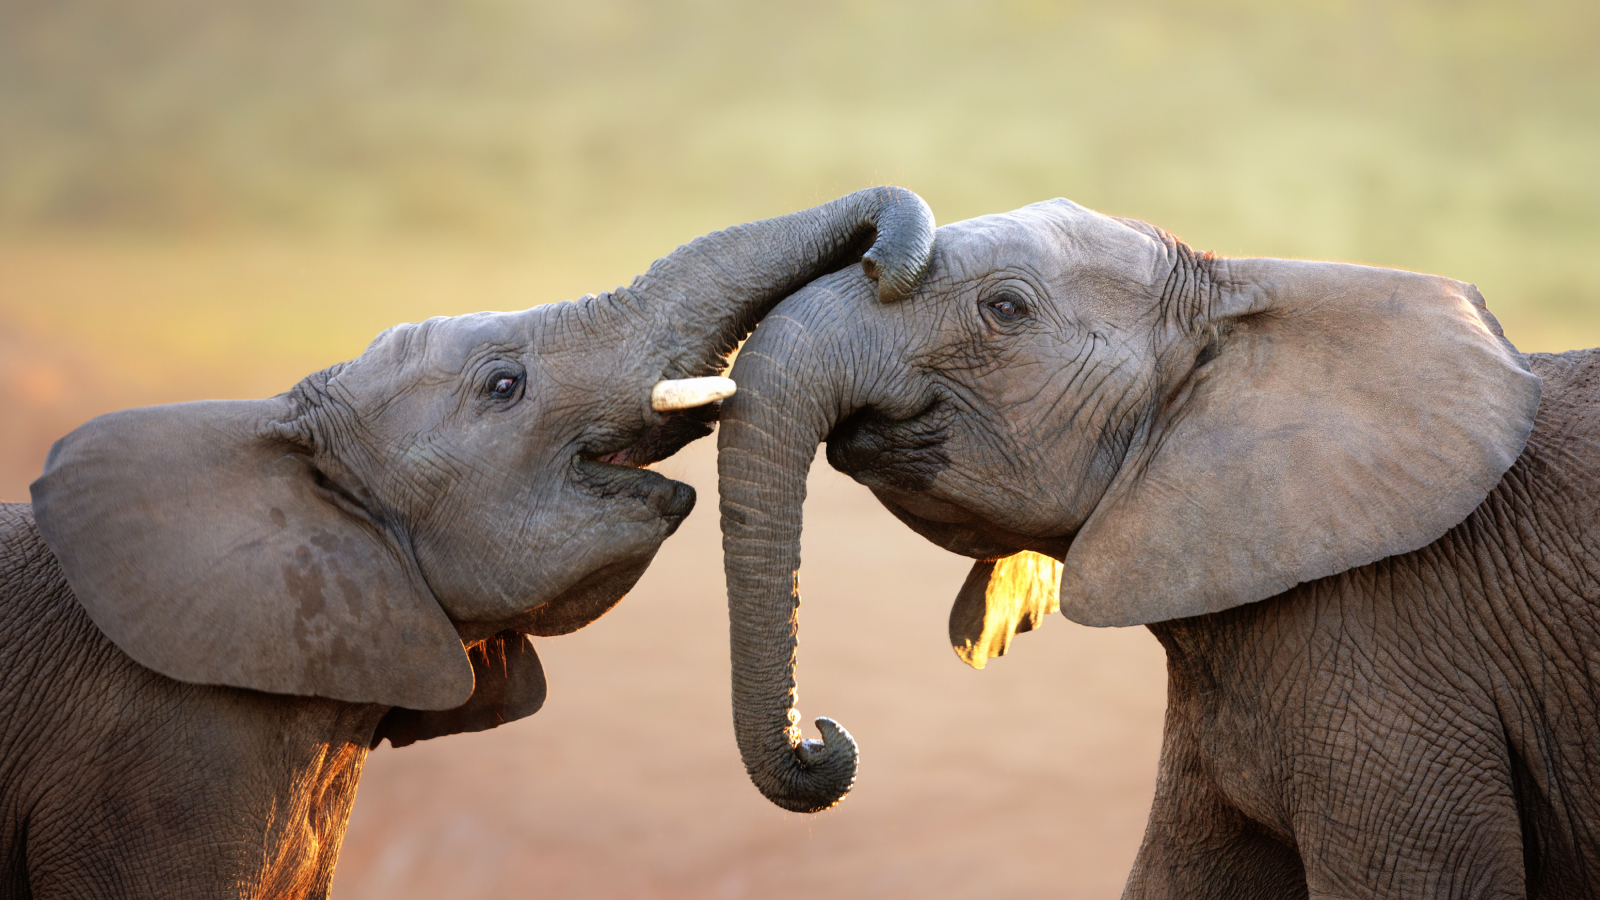 Elephants say 'hello' to friends by flapping their ears and making little rumbly noises